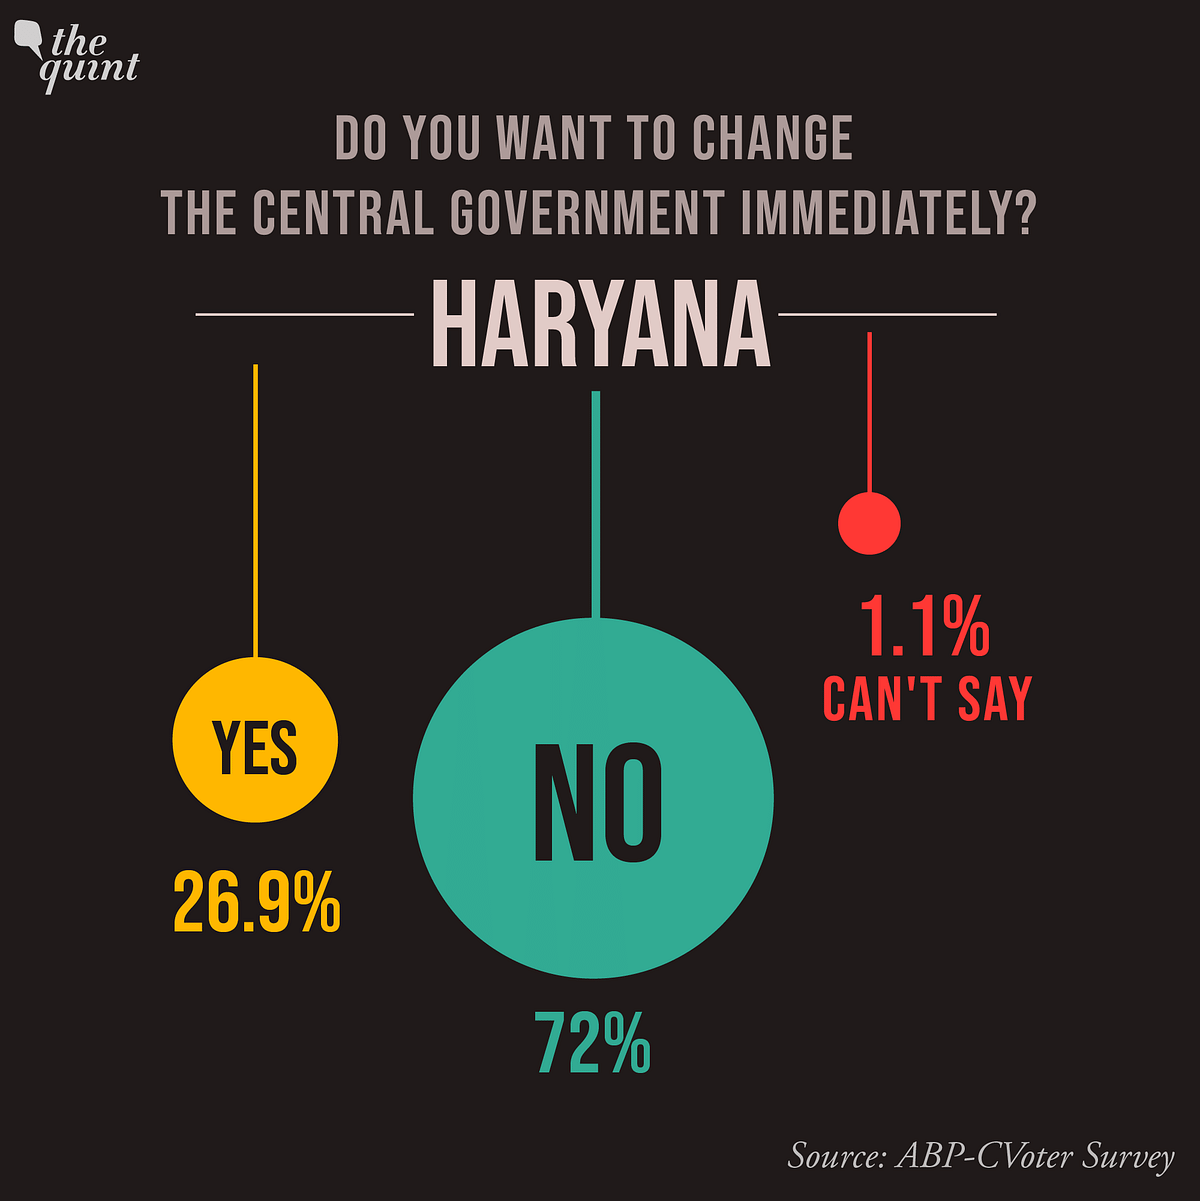 This trend comes even as majority of respondents  said they want to change the state govt “immediately”.